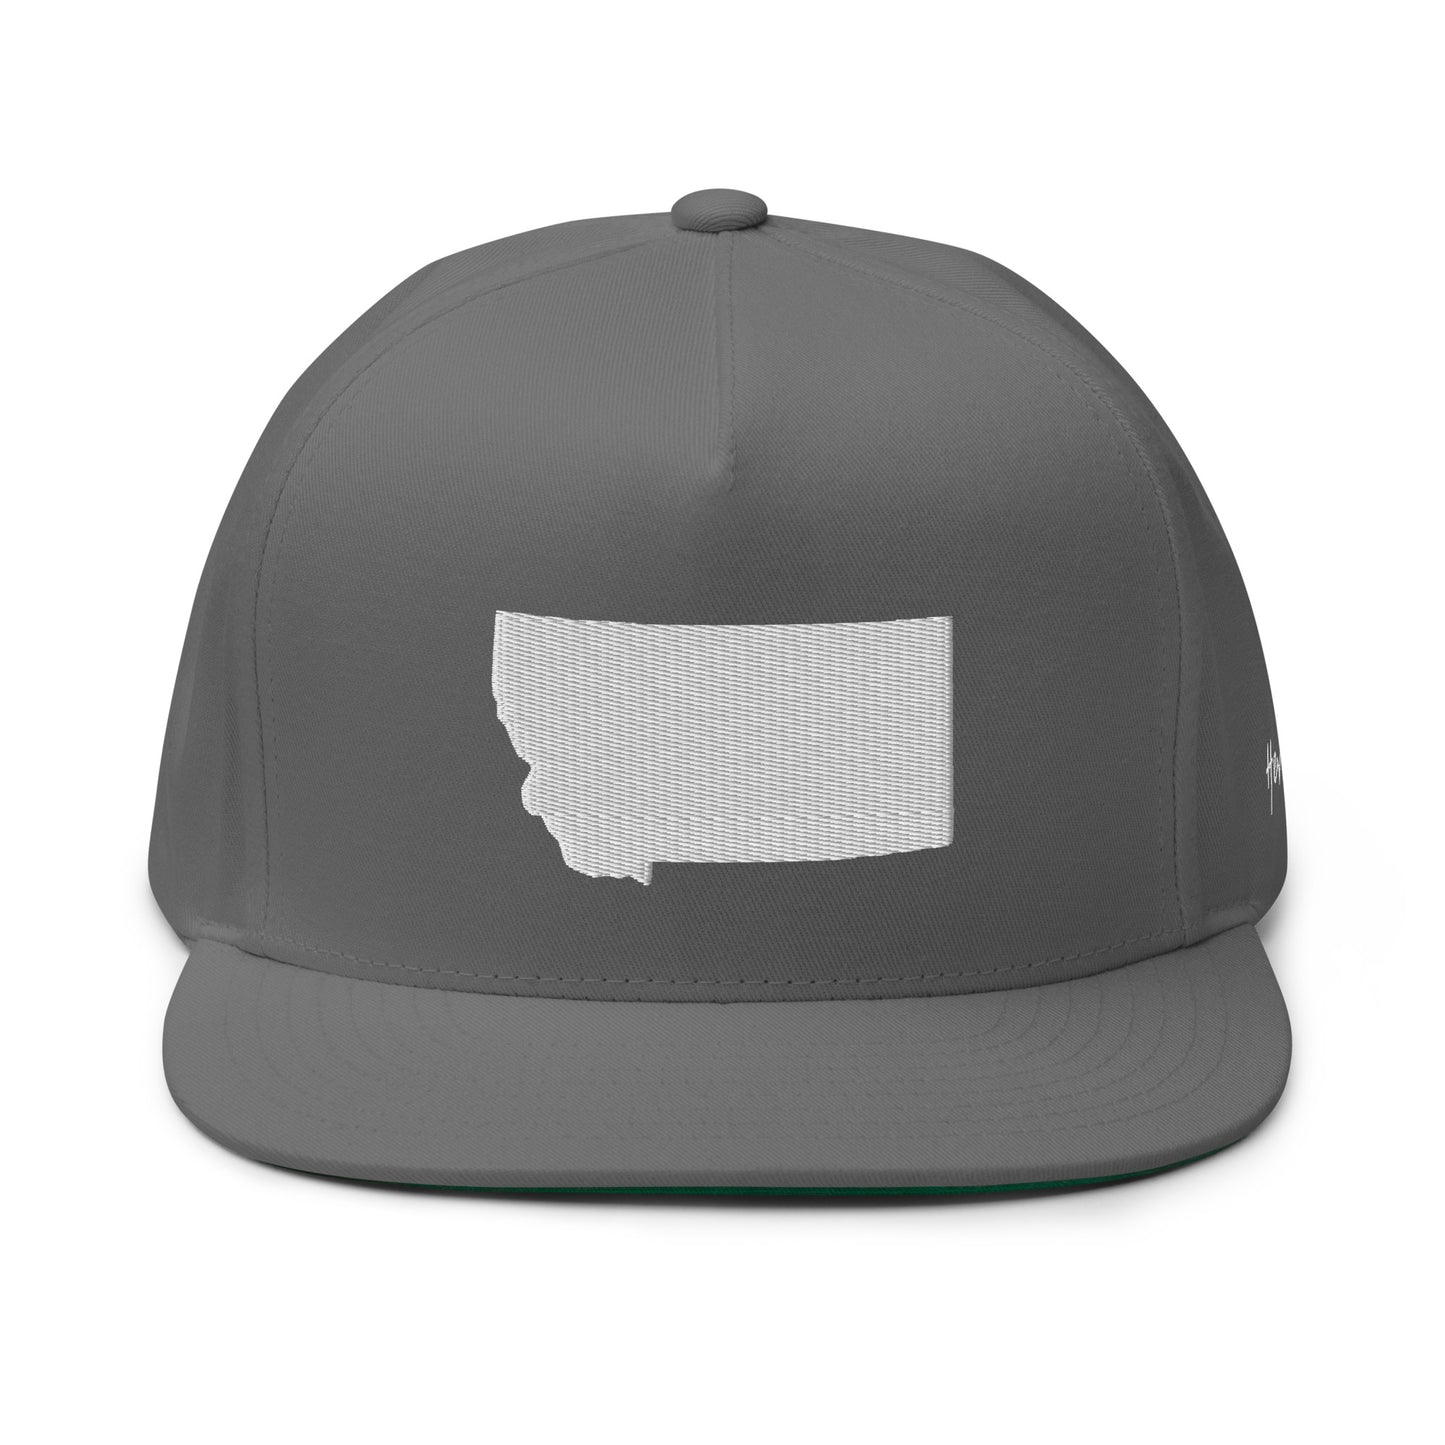 Montana State Silhouette 5 Panel A-Frame Snapback Hat